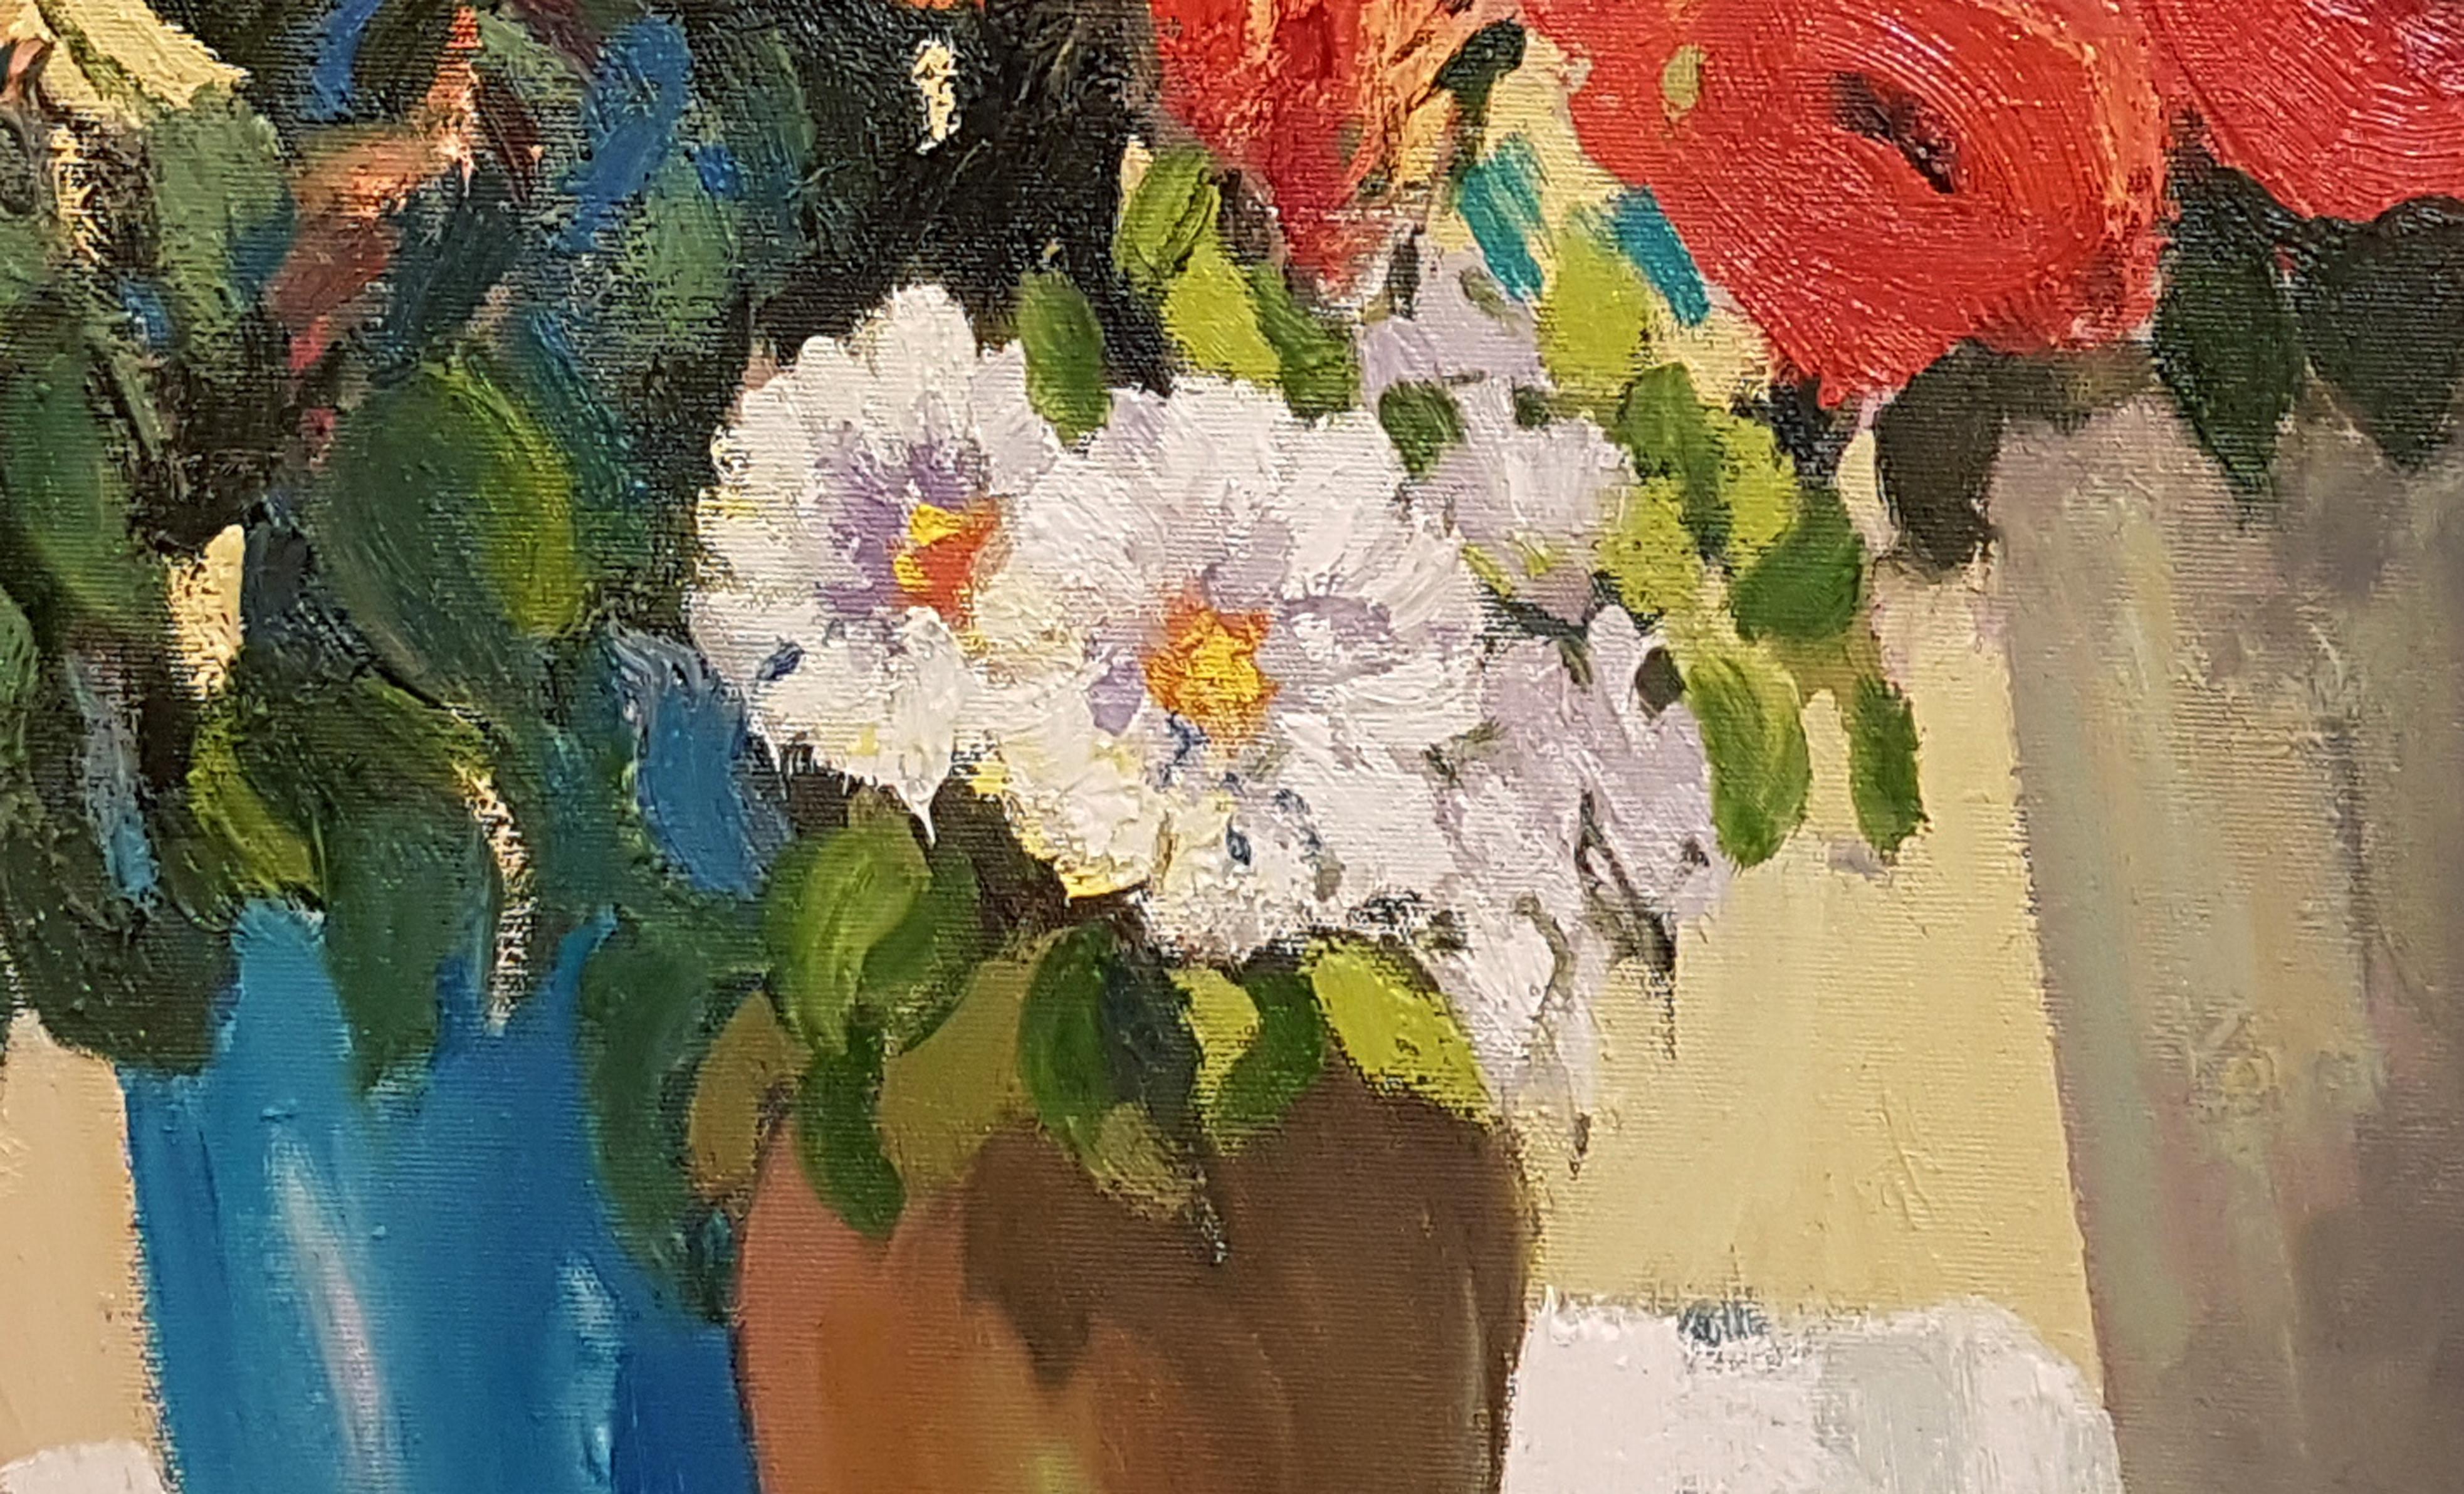 Artist: Ara H. Hakobyan
Work: Original Oil Painting, Handmade Artwork, One of a Kind
Medium: Oil on Canvas
Year: 2019
Style: Impressionism
Title: Flowers on a white table cloth
Size: 24